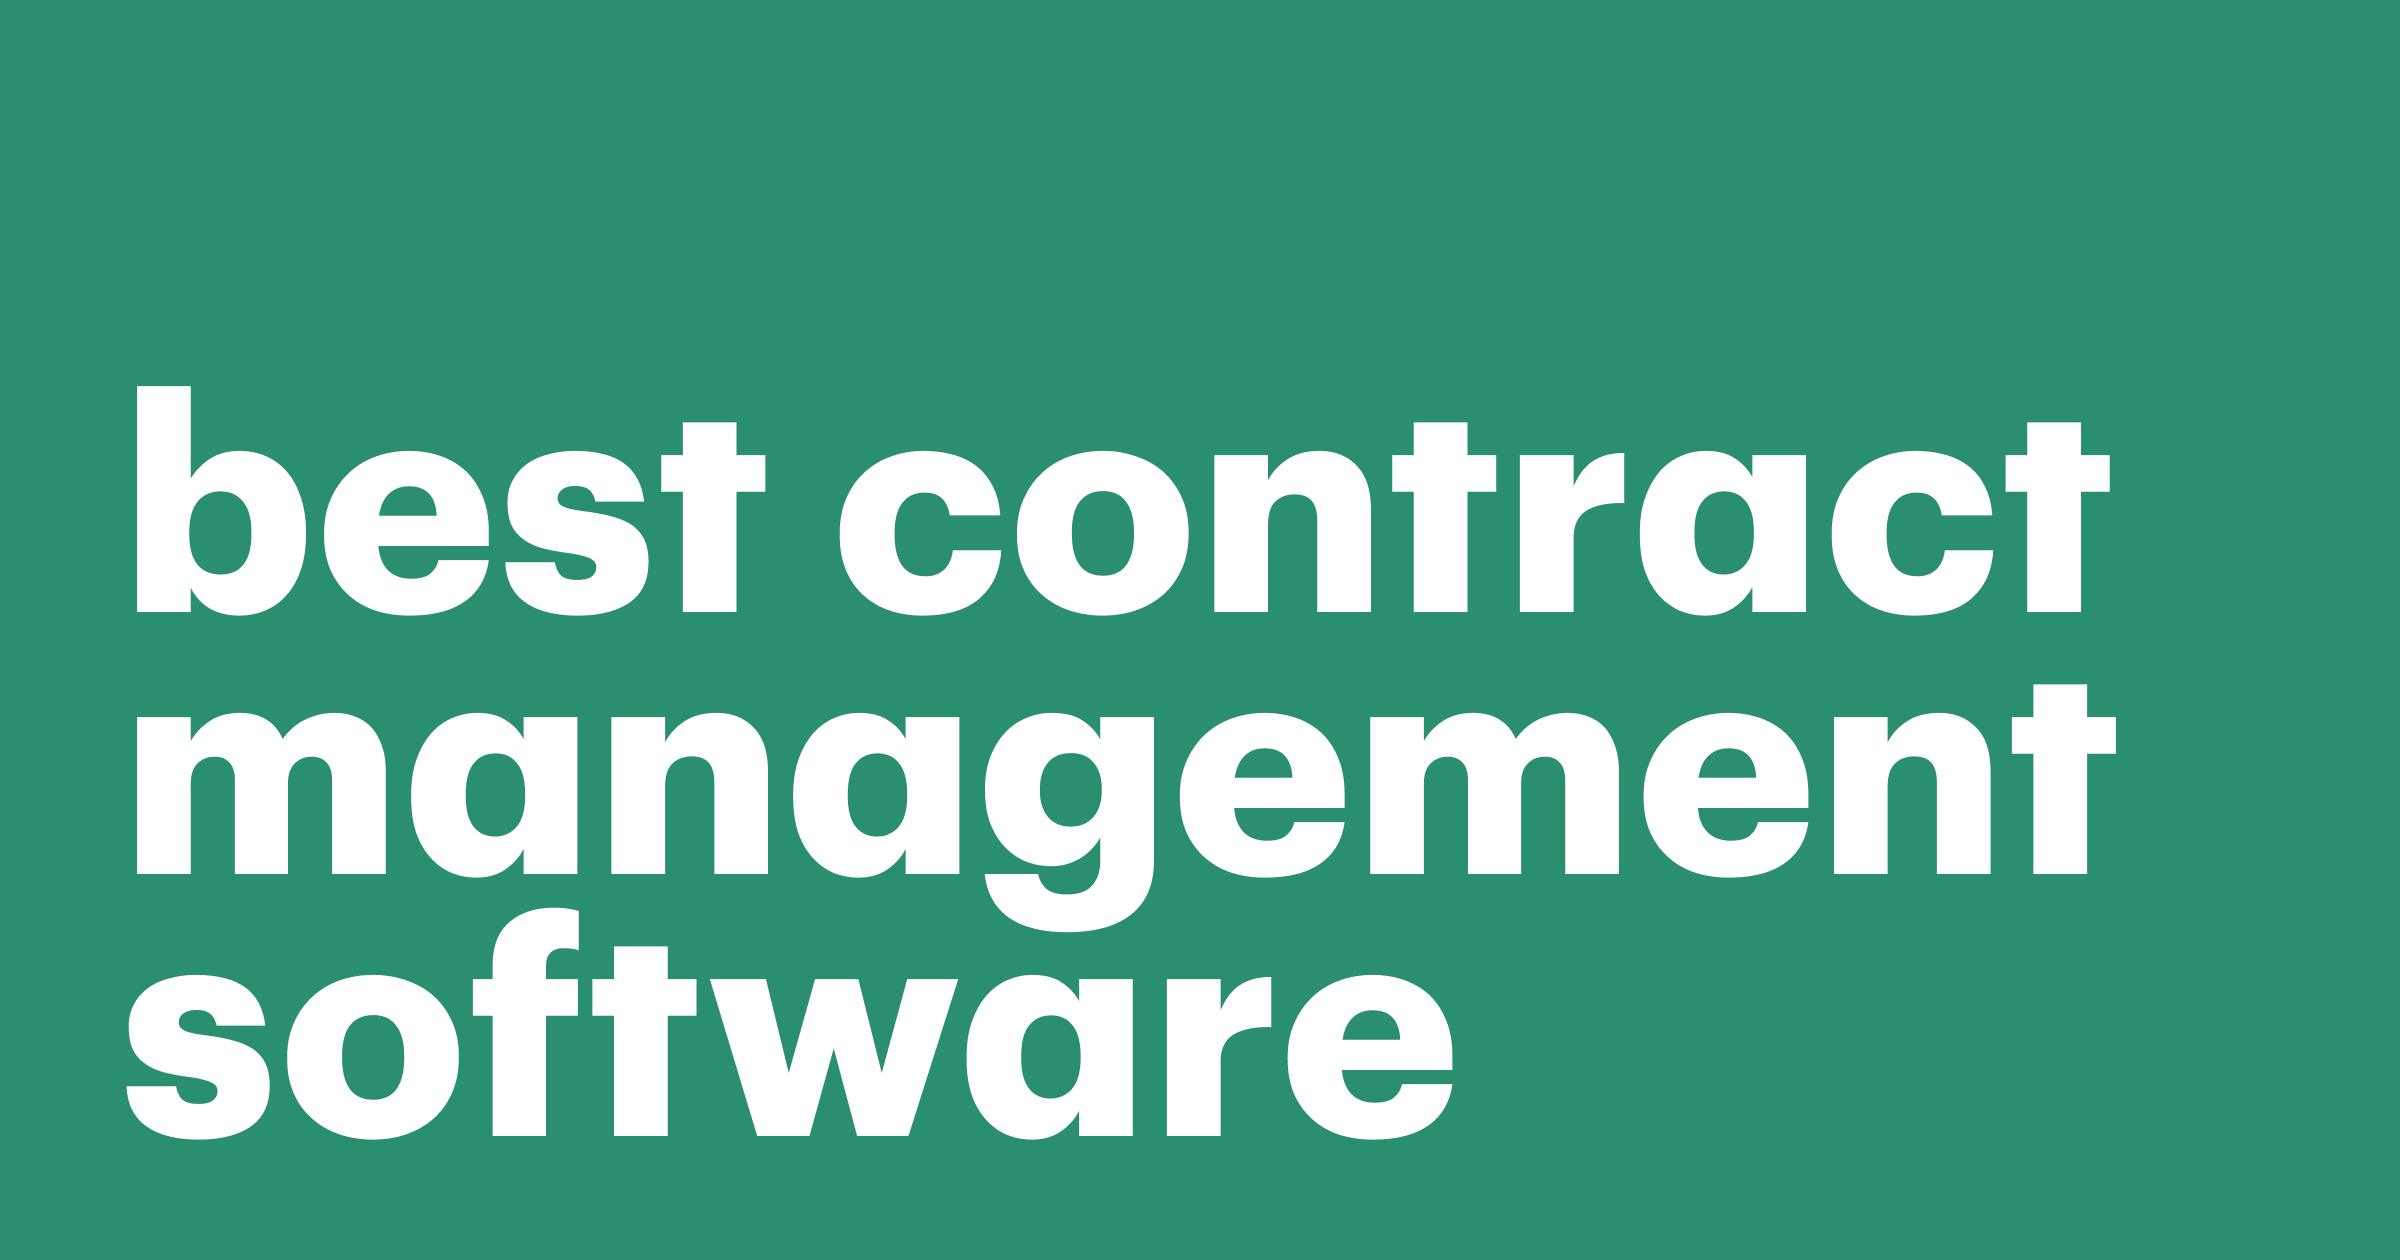 15 best contract management software in 2023